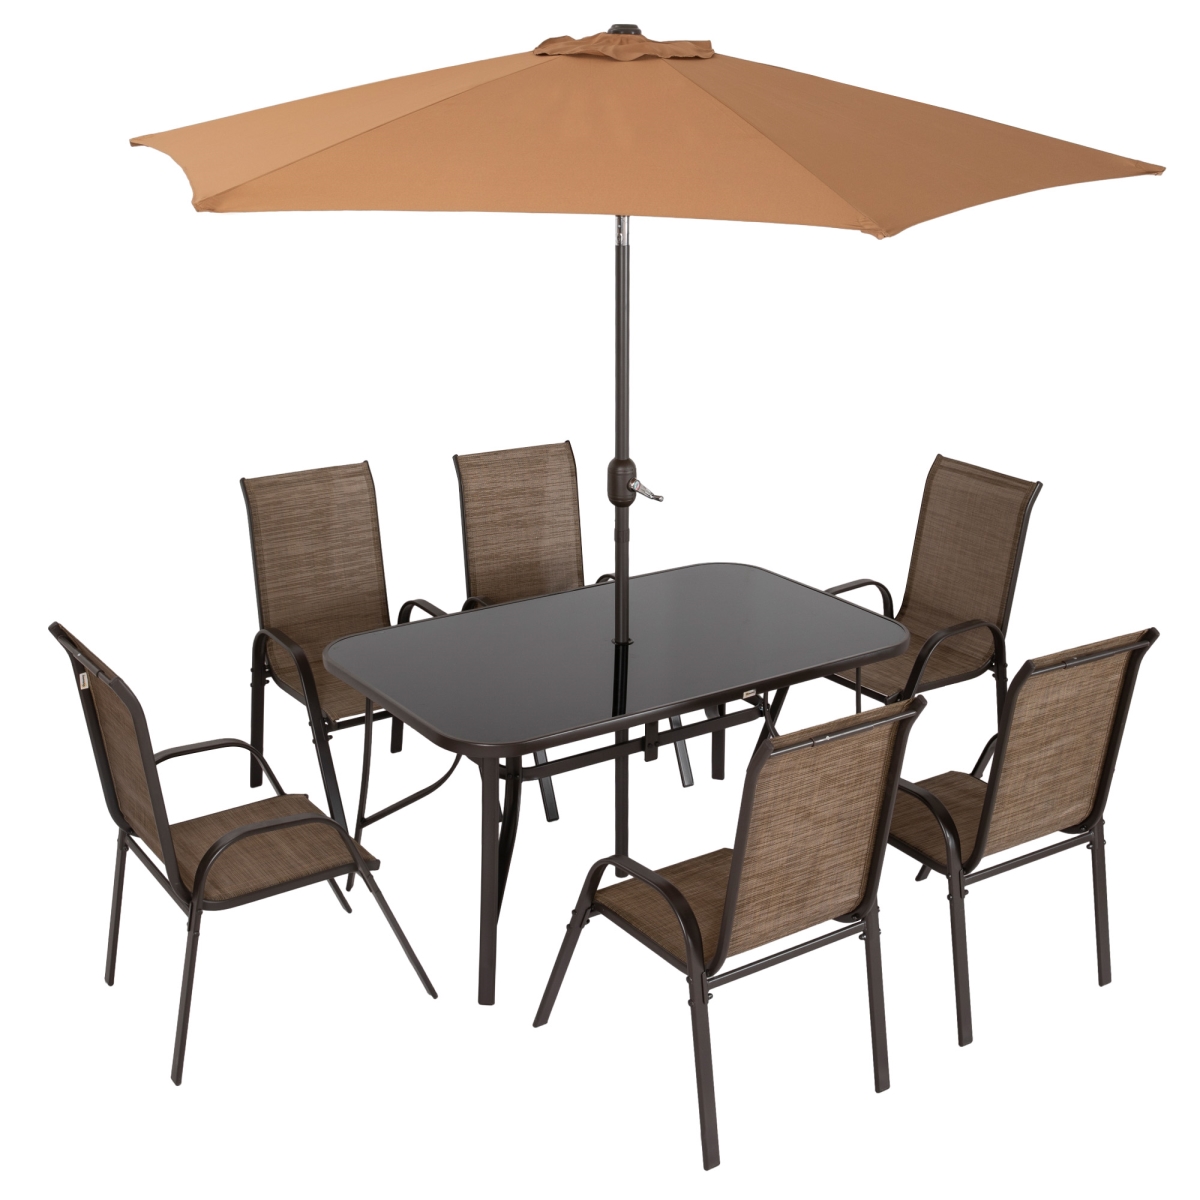 Picture of 212 Main 84B-921V00LN Outsunny Patio Furniture Set with 9 ft. Patio Umbrella&#44; Outdoor Dining Table & Chairs&#44; Light Mixed Brown - 8 Piece